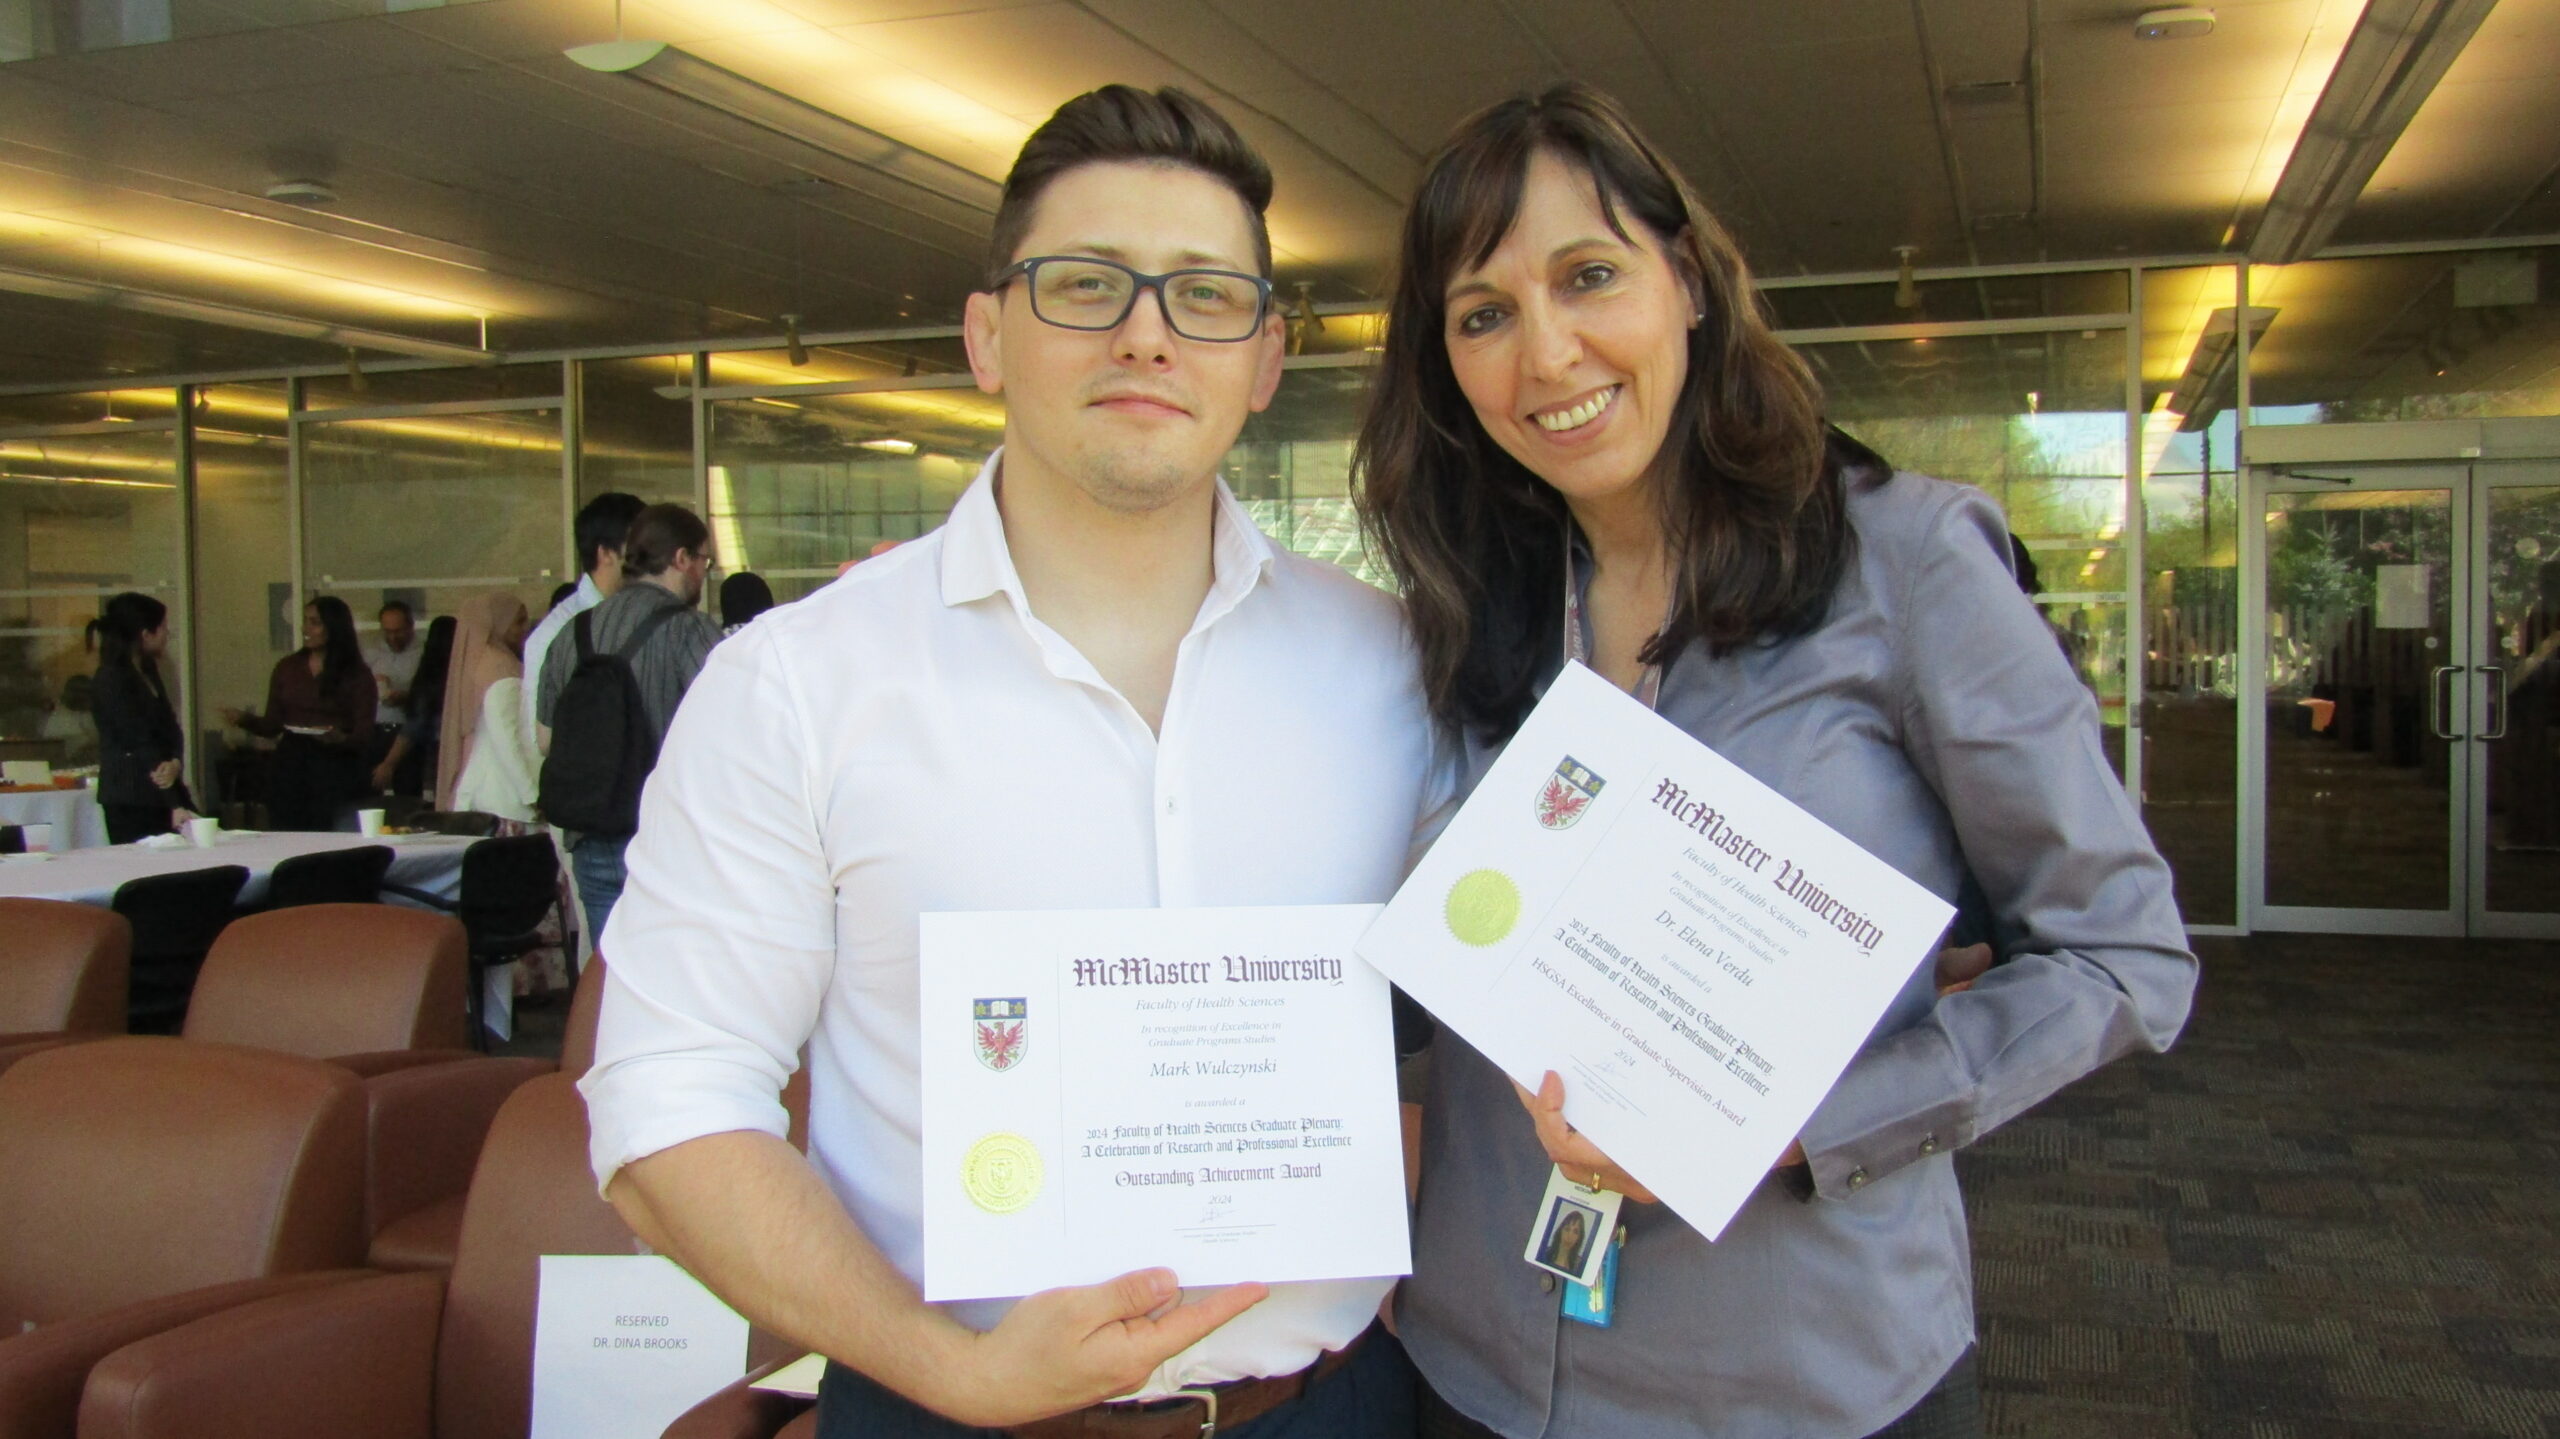 PhD student Mark Wulczynski and his supervisor Elena Verdu smile side-by-side holding certificates of their awards at the Graduate Plenary.